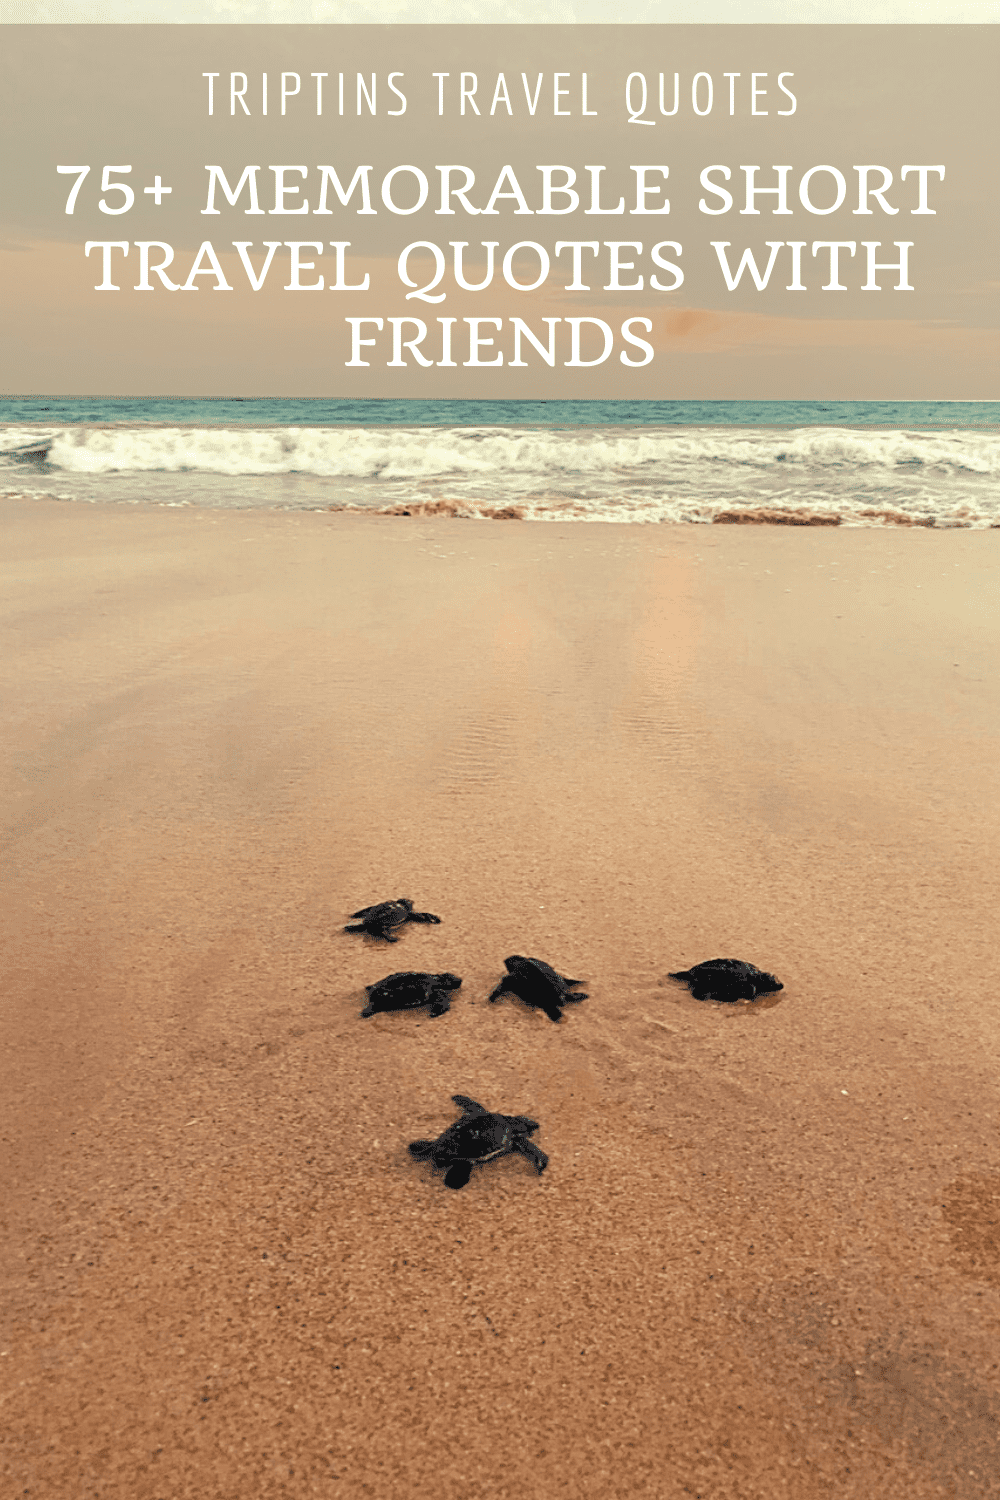 Short Travel Quotes for Friends